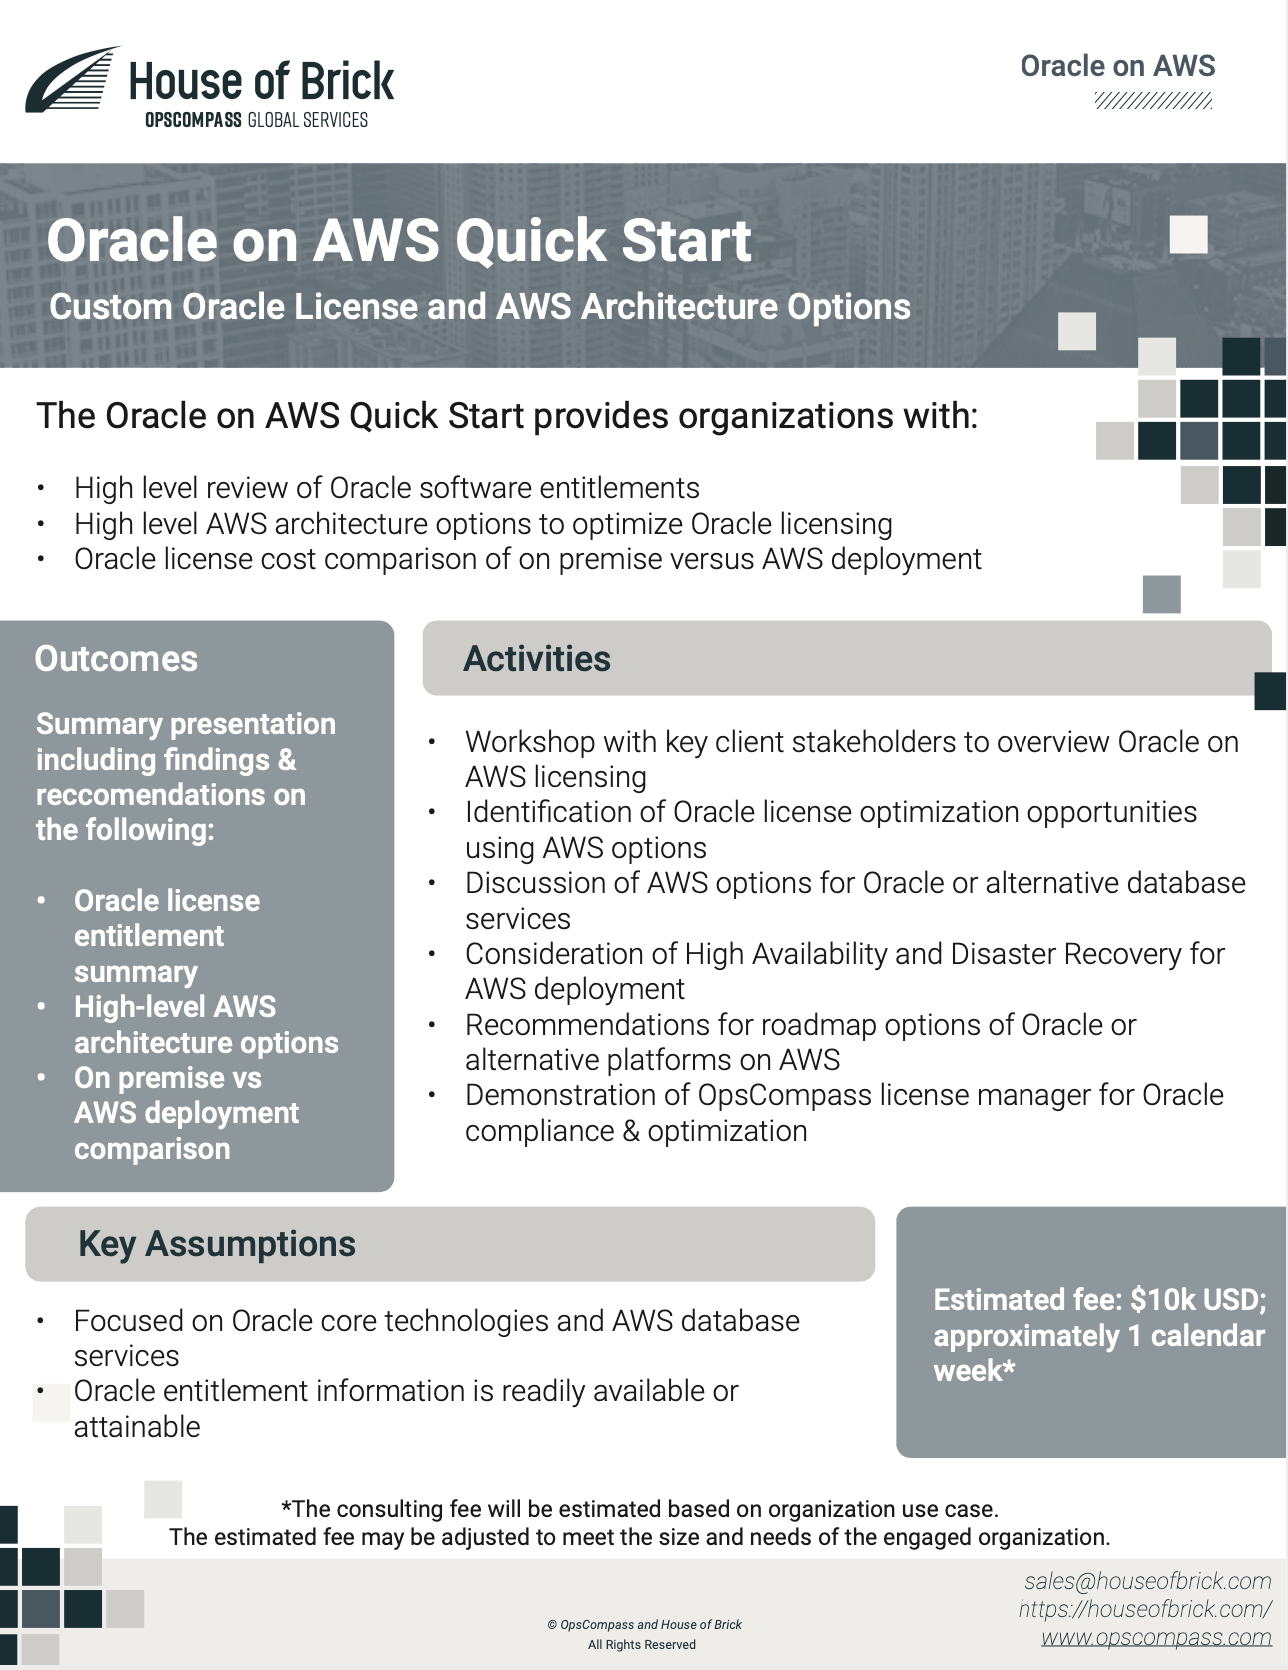 Oracle on AWS Quick Start